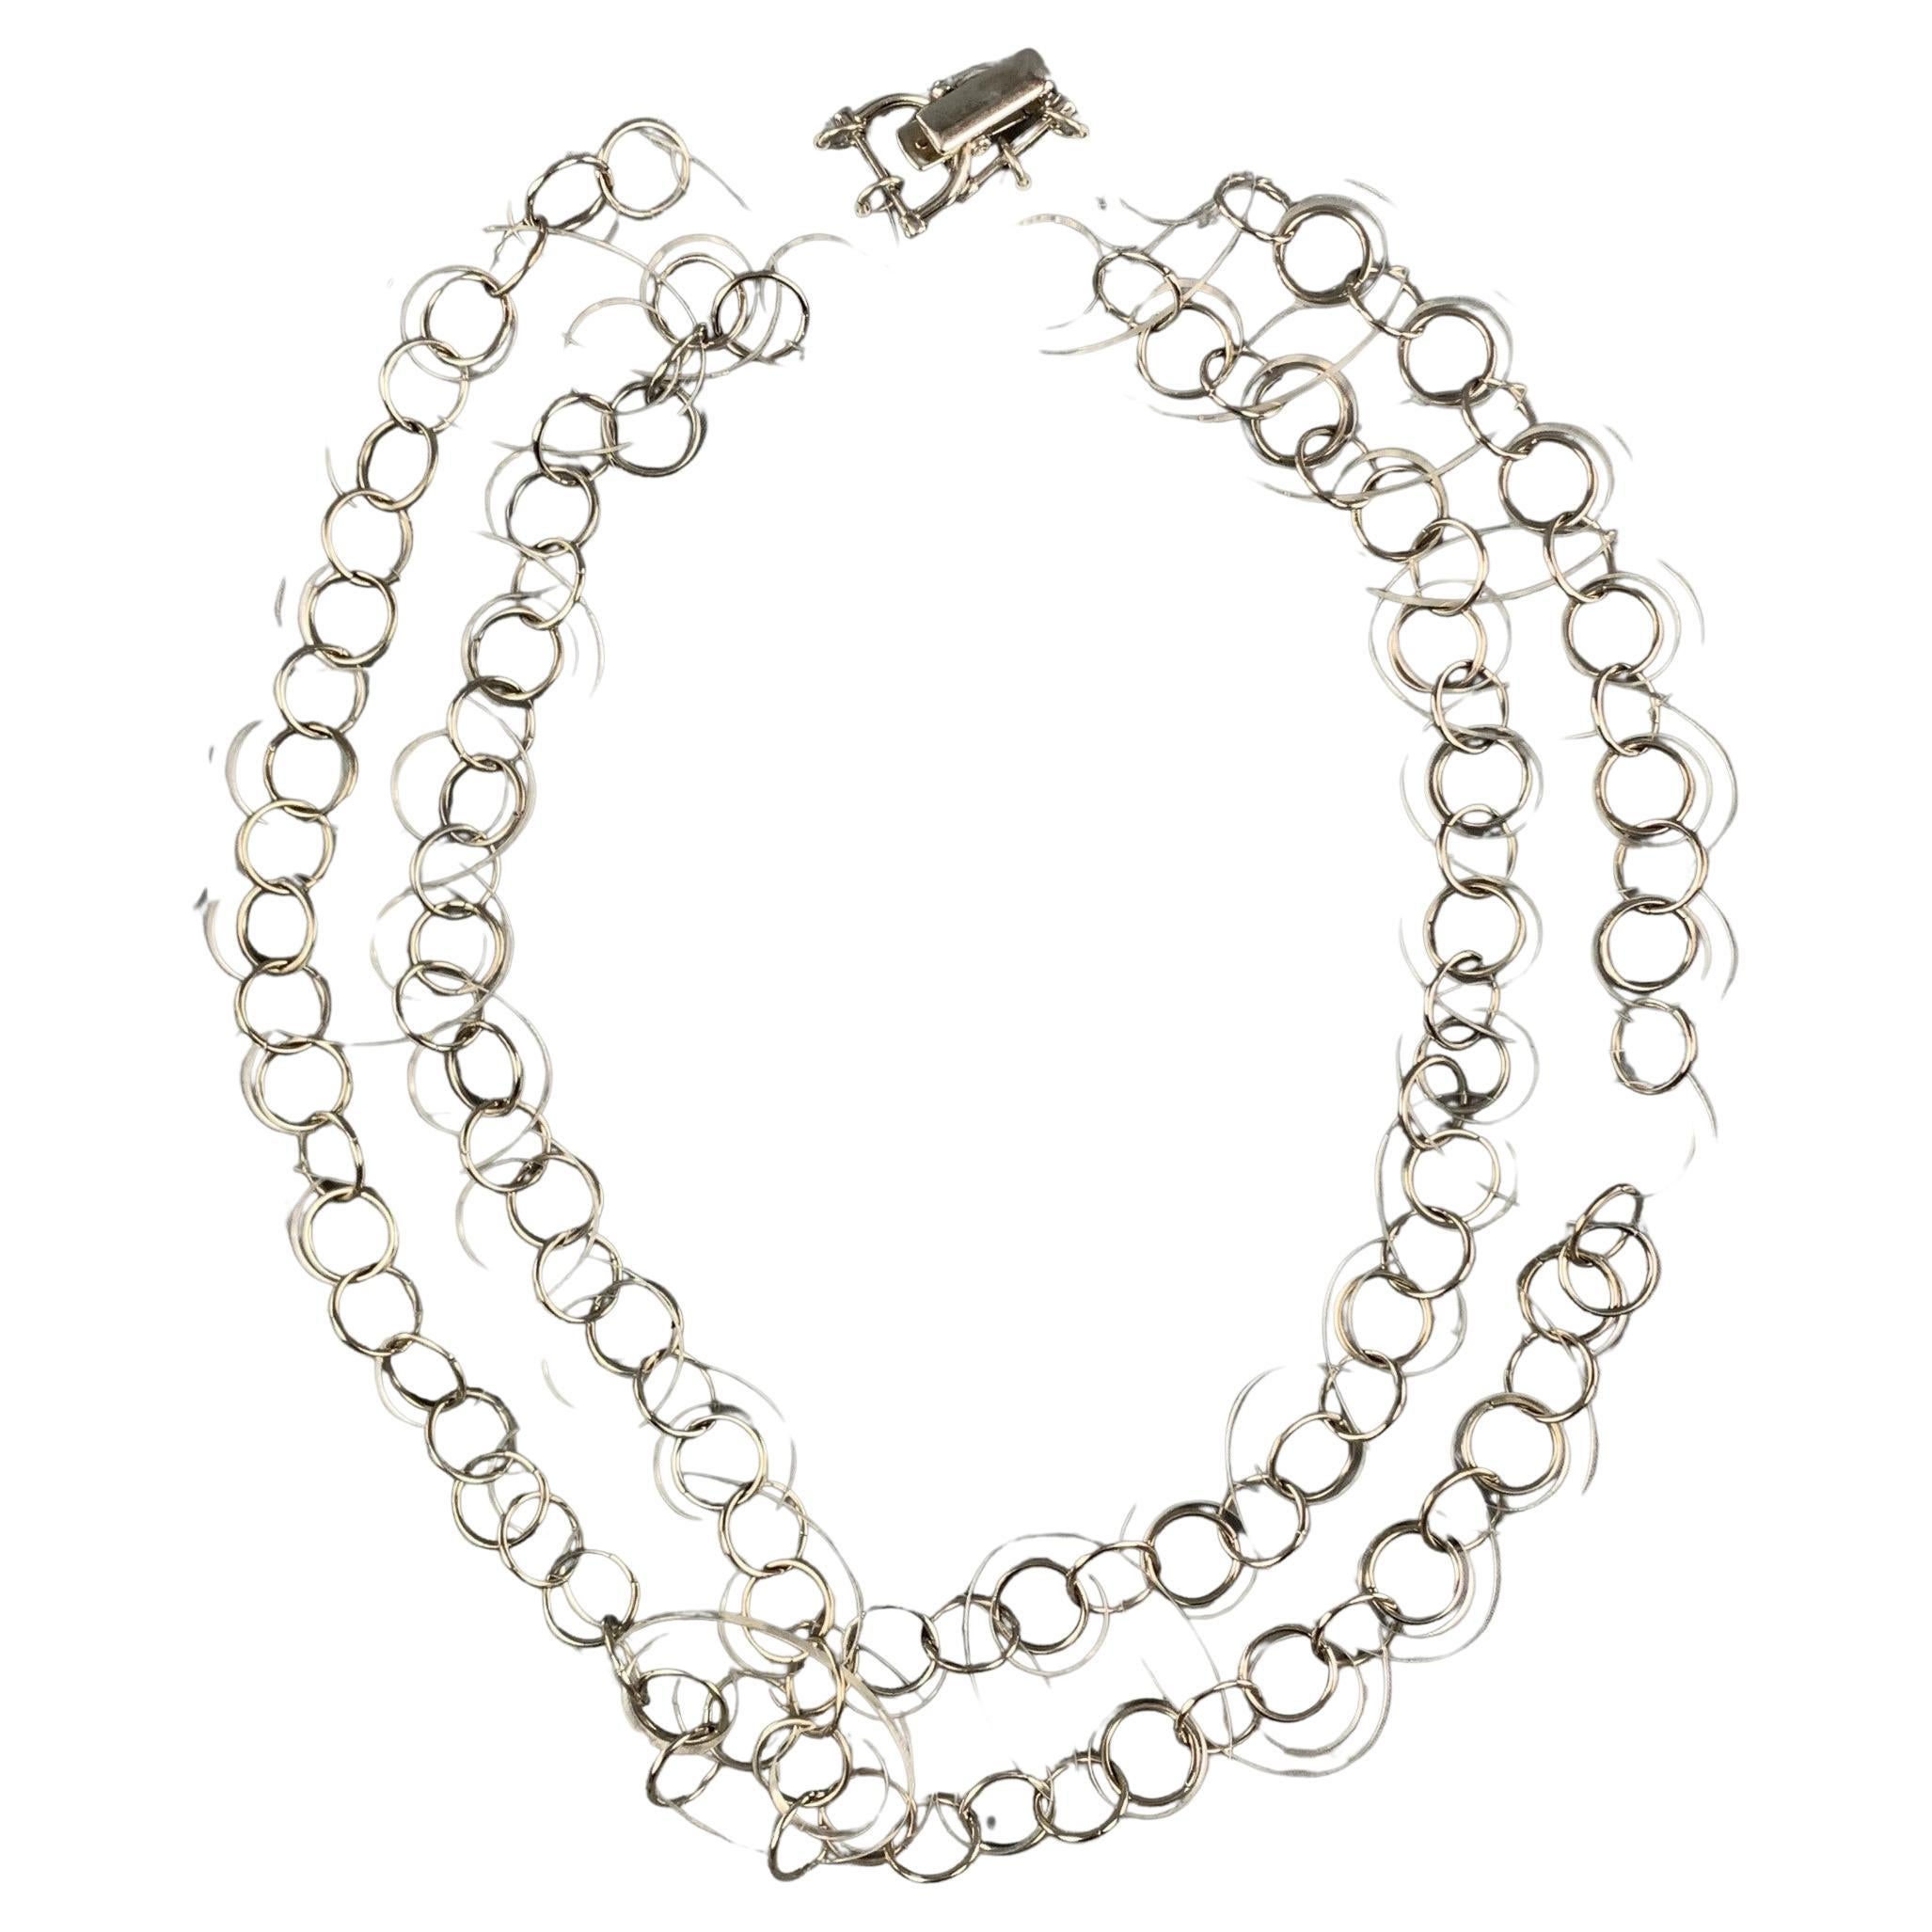 PACO RABANNE Clear Silver Link Lucite Ring Necklace Belt